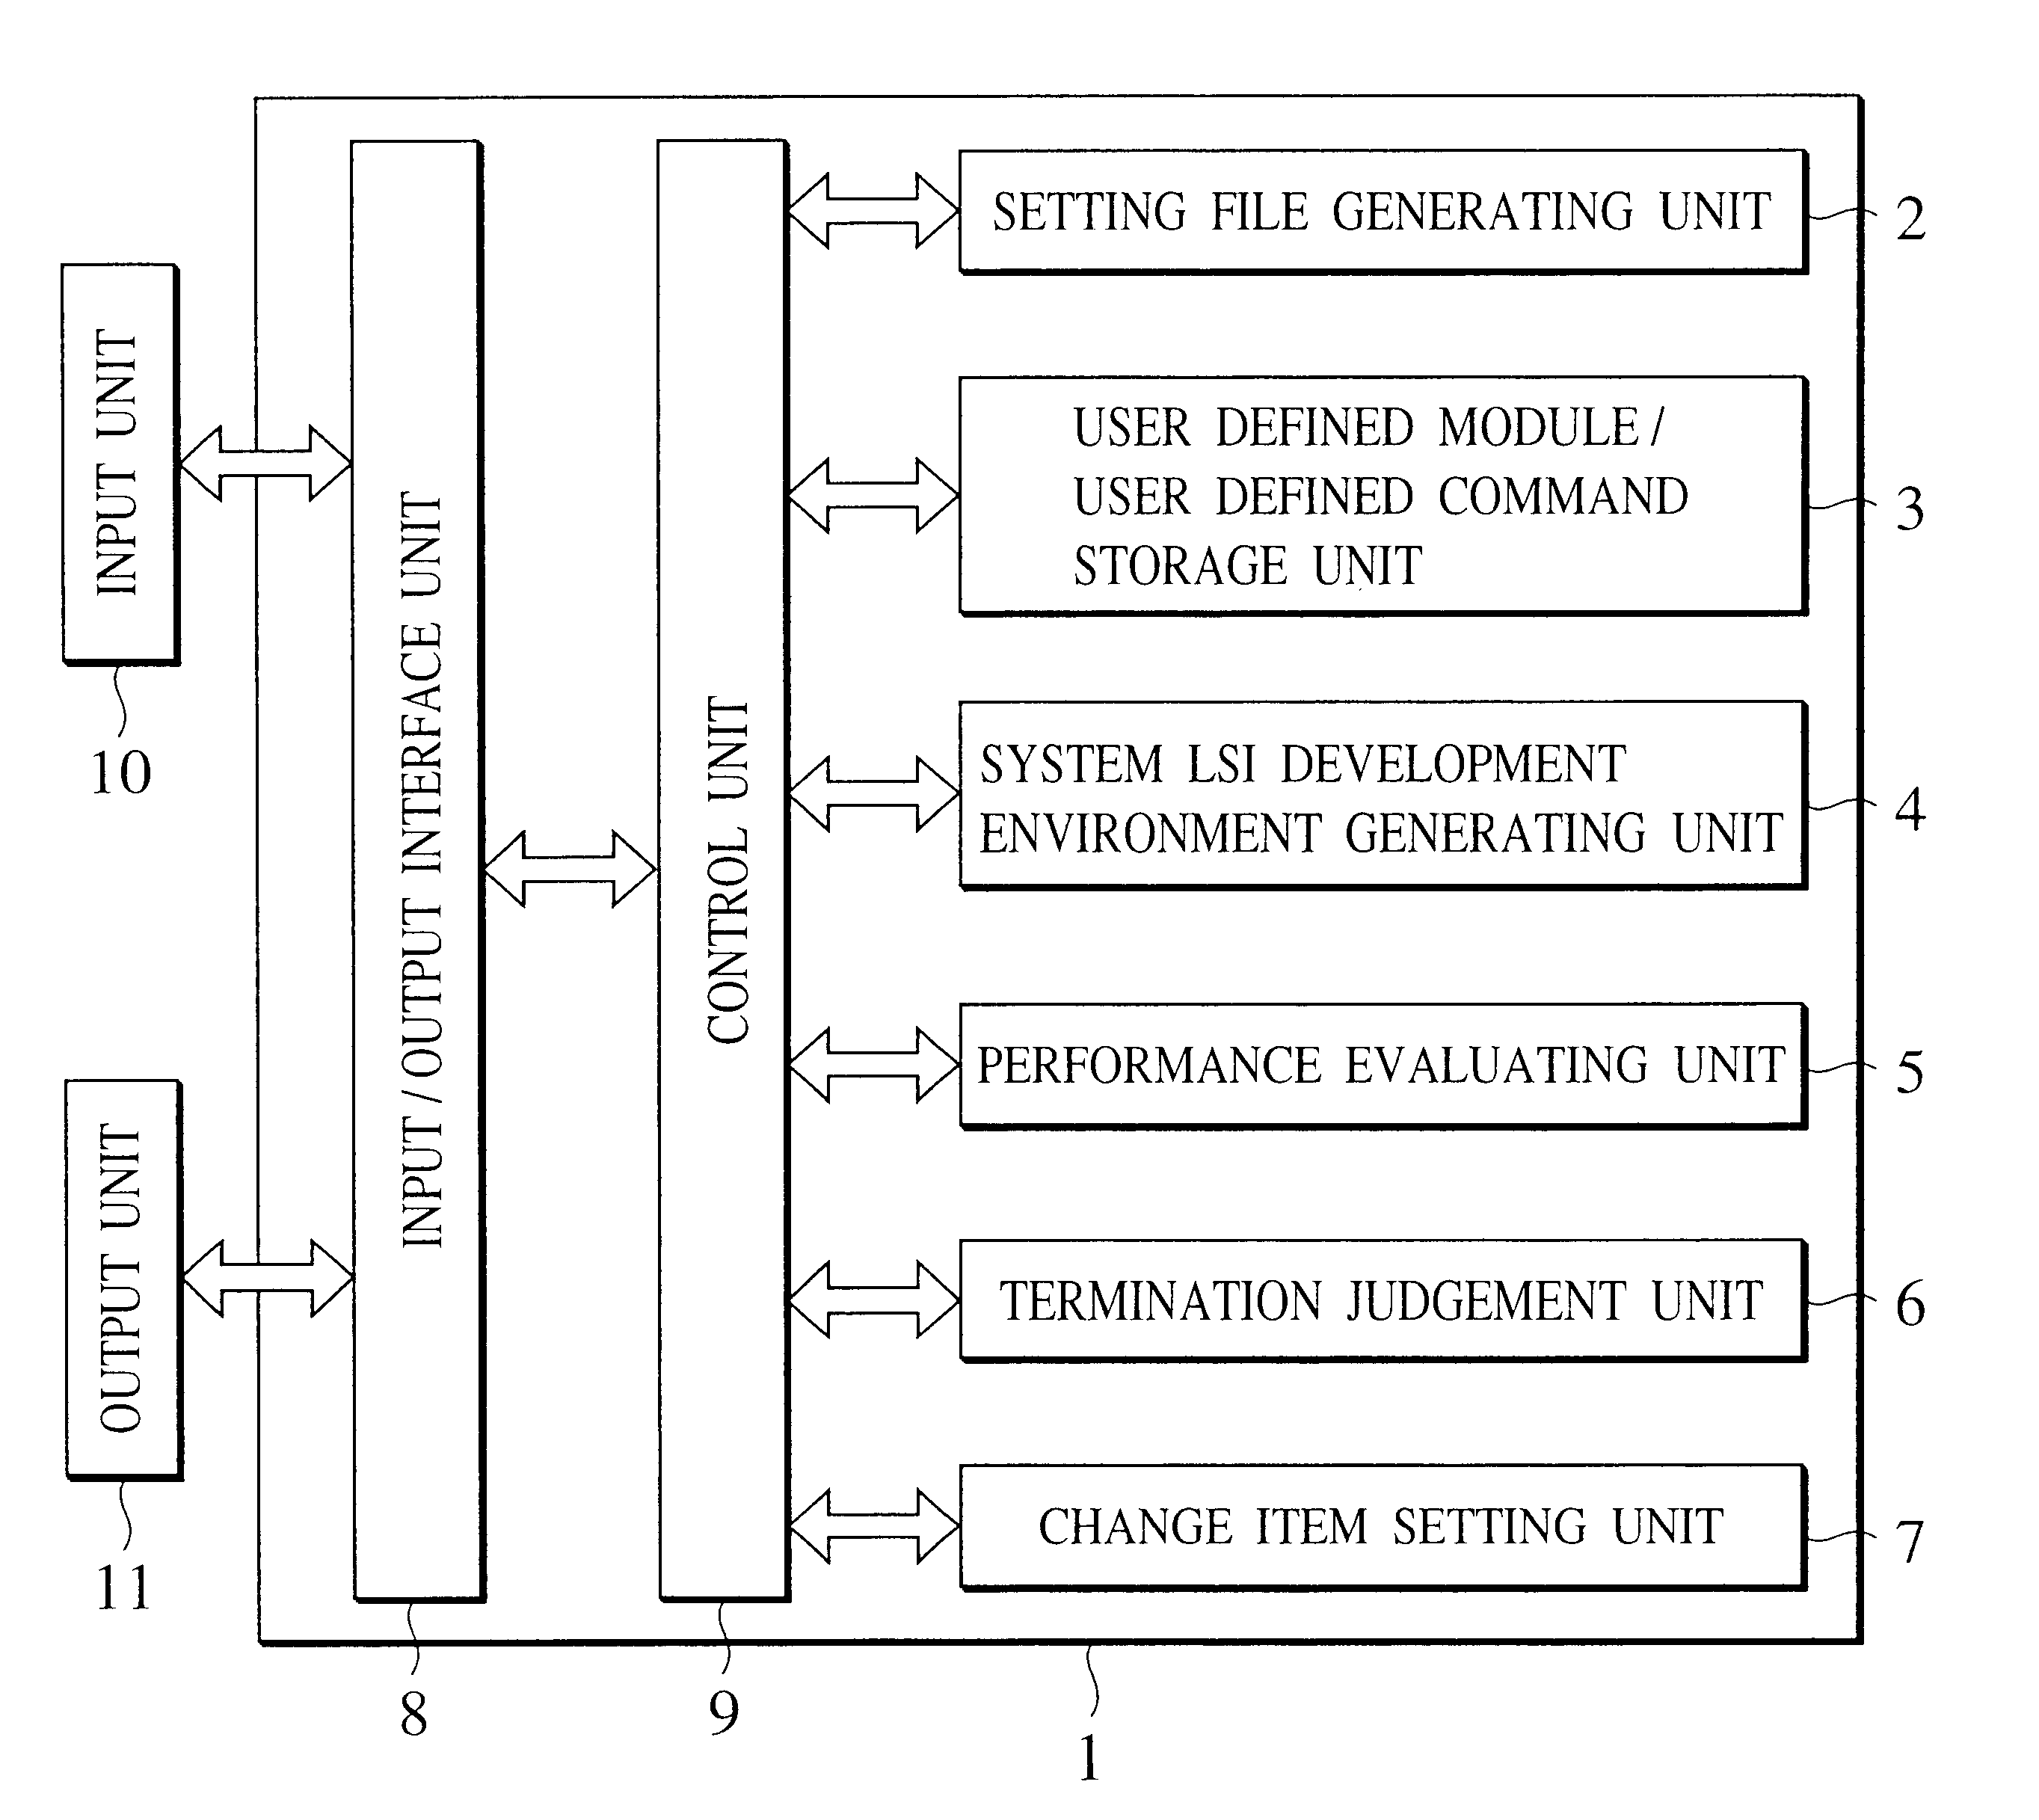 System LSI development apparatus and the method thereof for developing a system optimal to an application